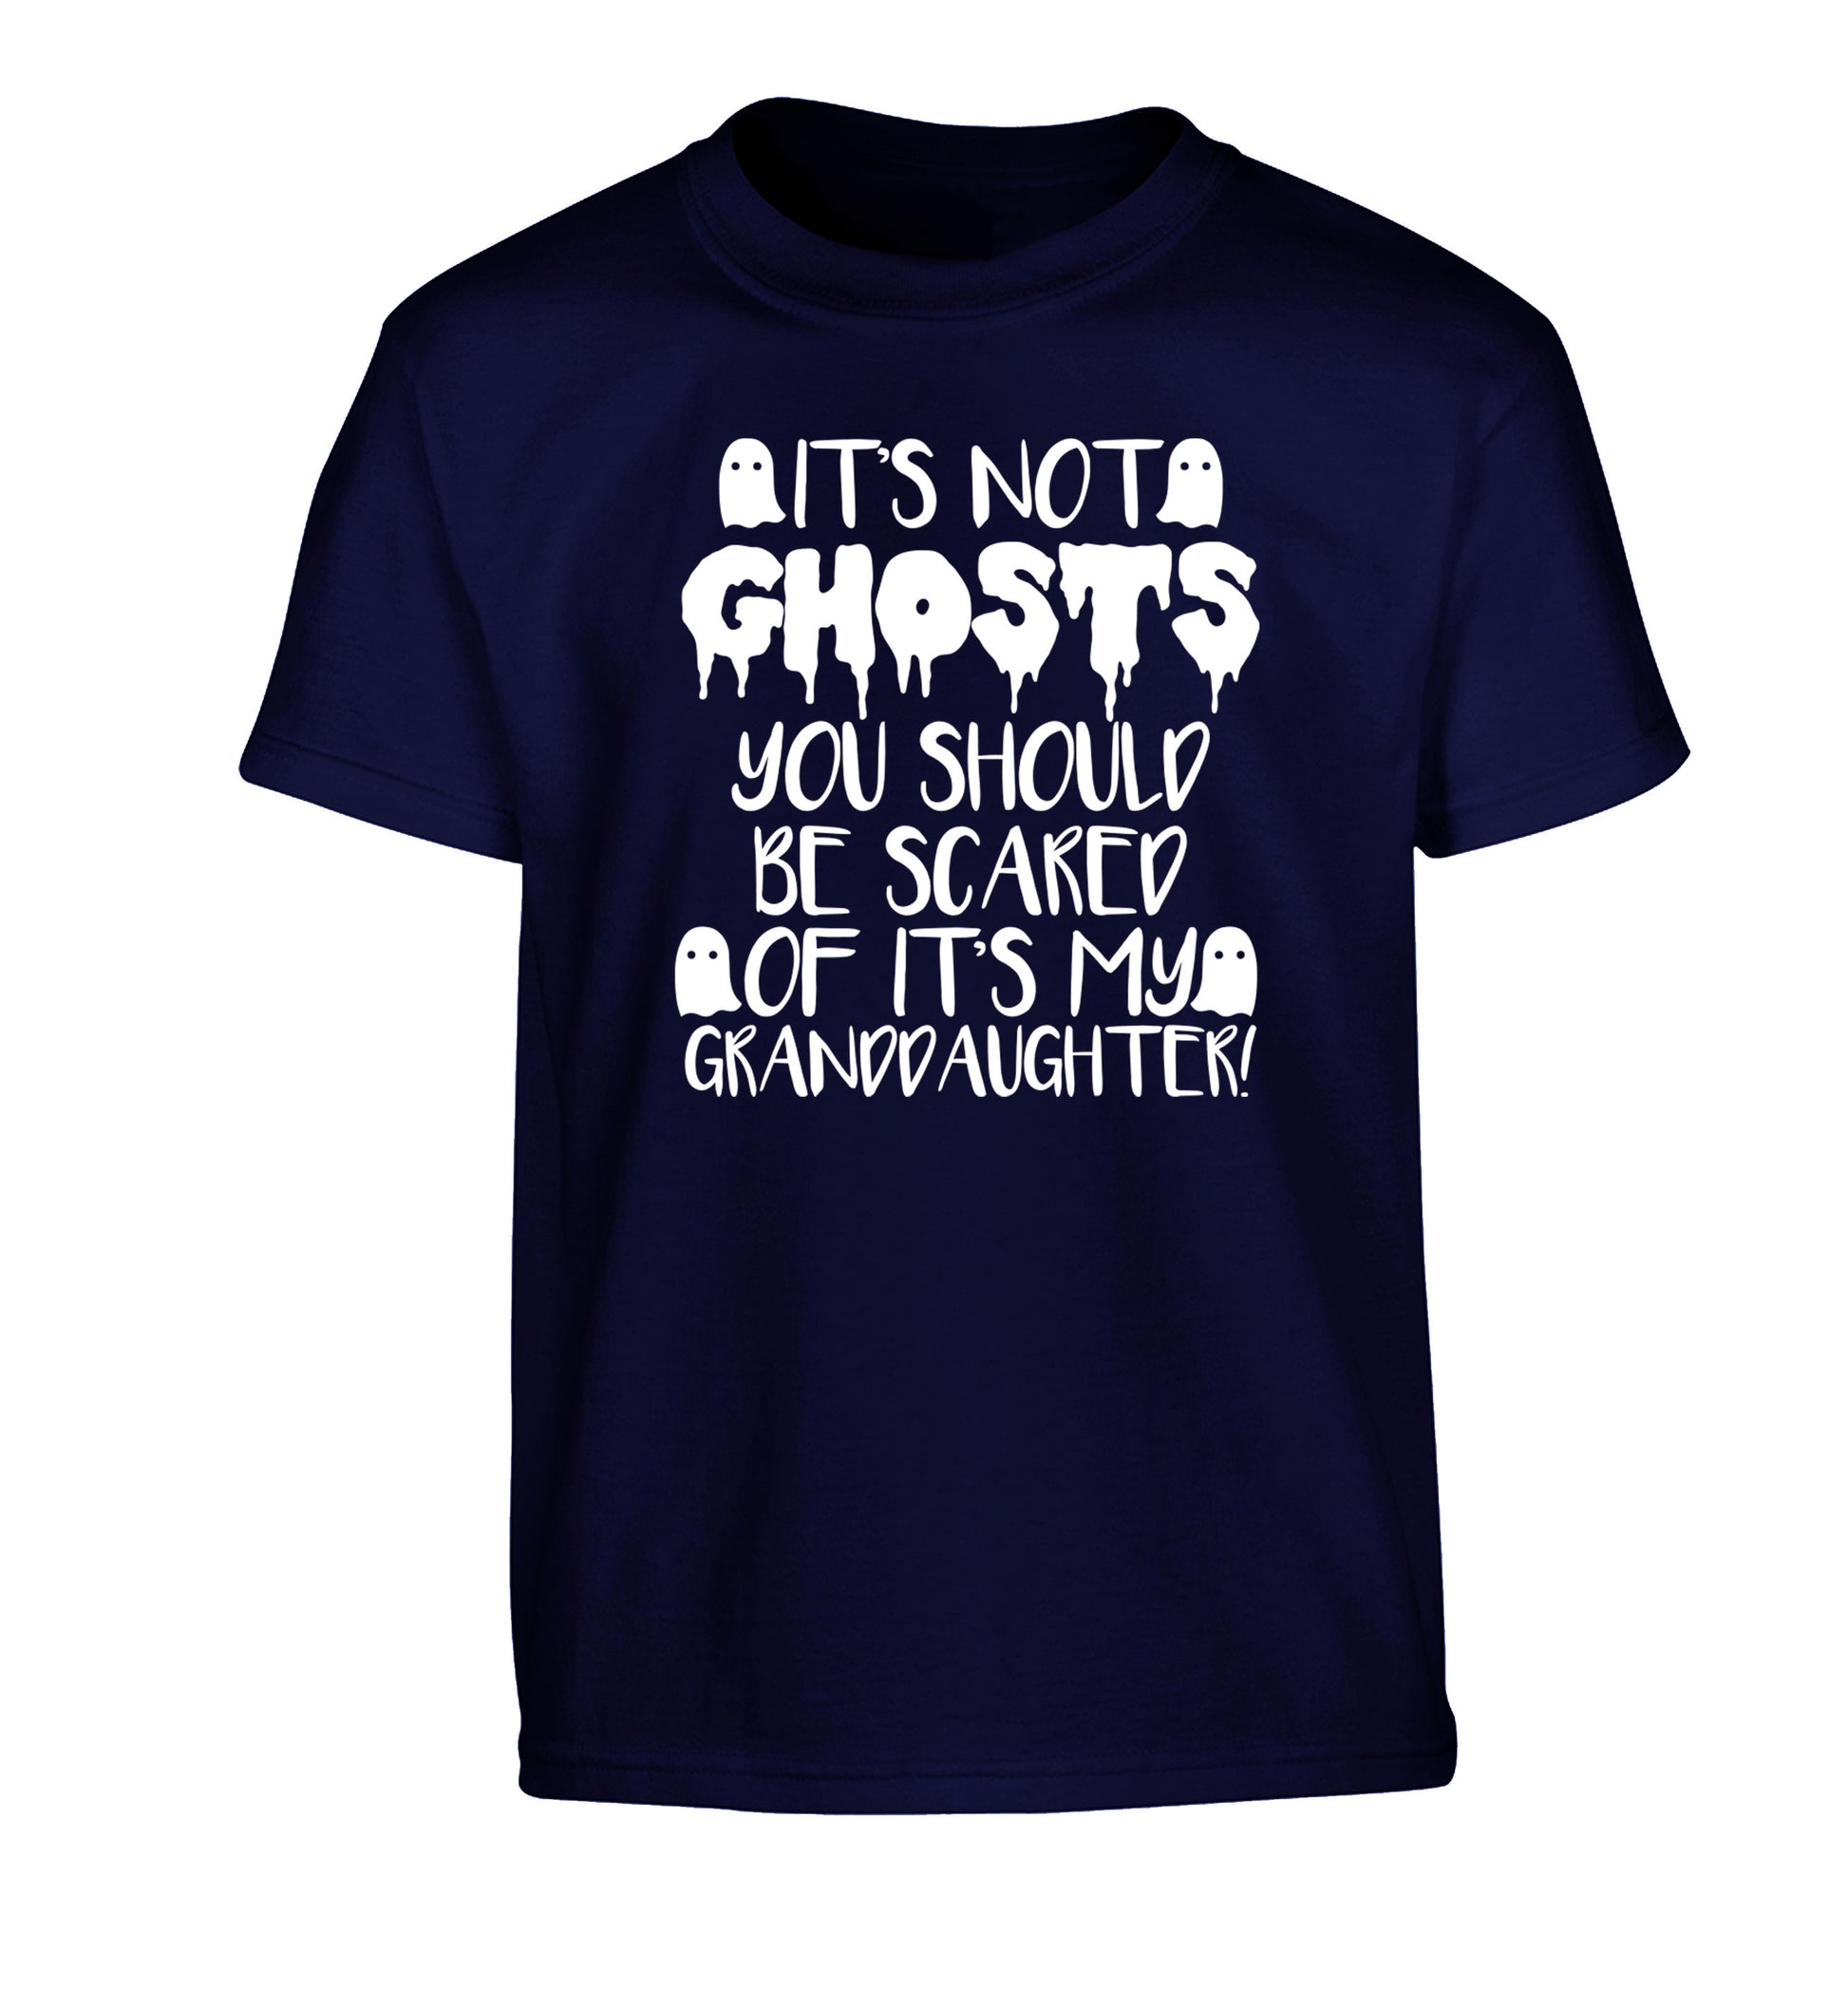 It's not ghosts you should be scared of it's my granddaughter! Children's navy Tshirt 12-14 Years